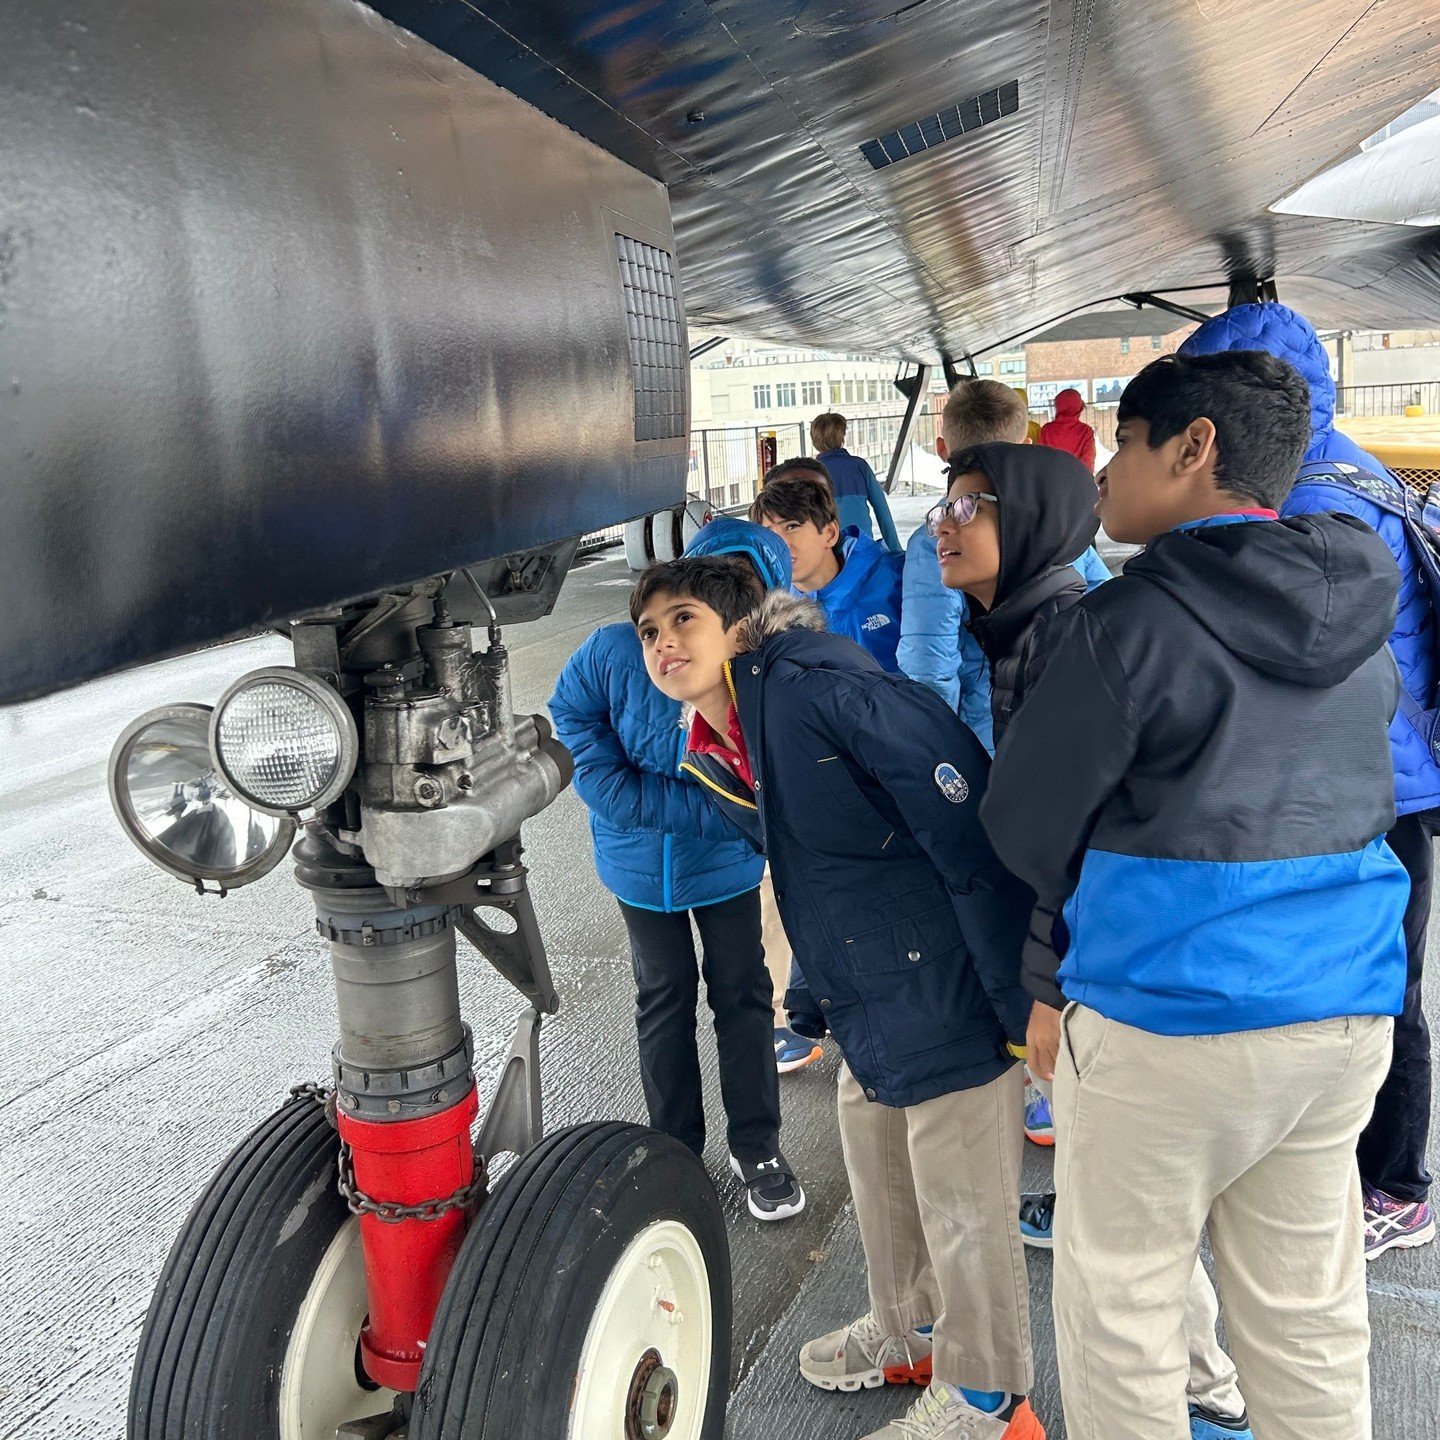 The Grade 4 class delved into the wonders of space at the @IntrepidMuseum, uncovering the history of space exploration and spacecraft! Each artifact sparked their imagination, fueling their passion for the cosmos.